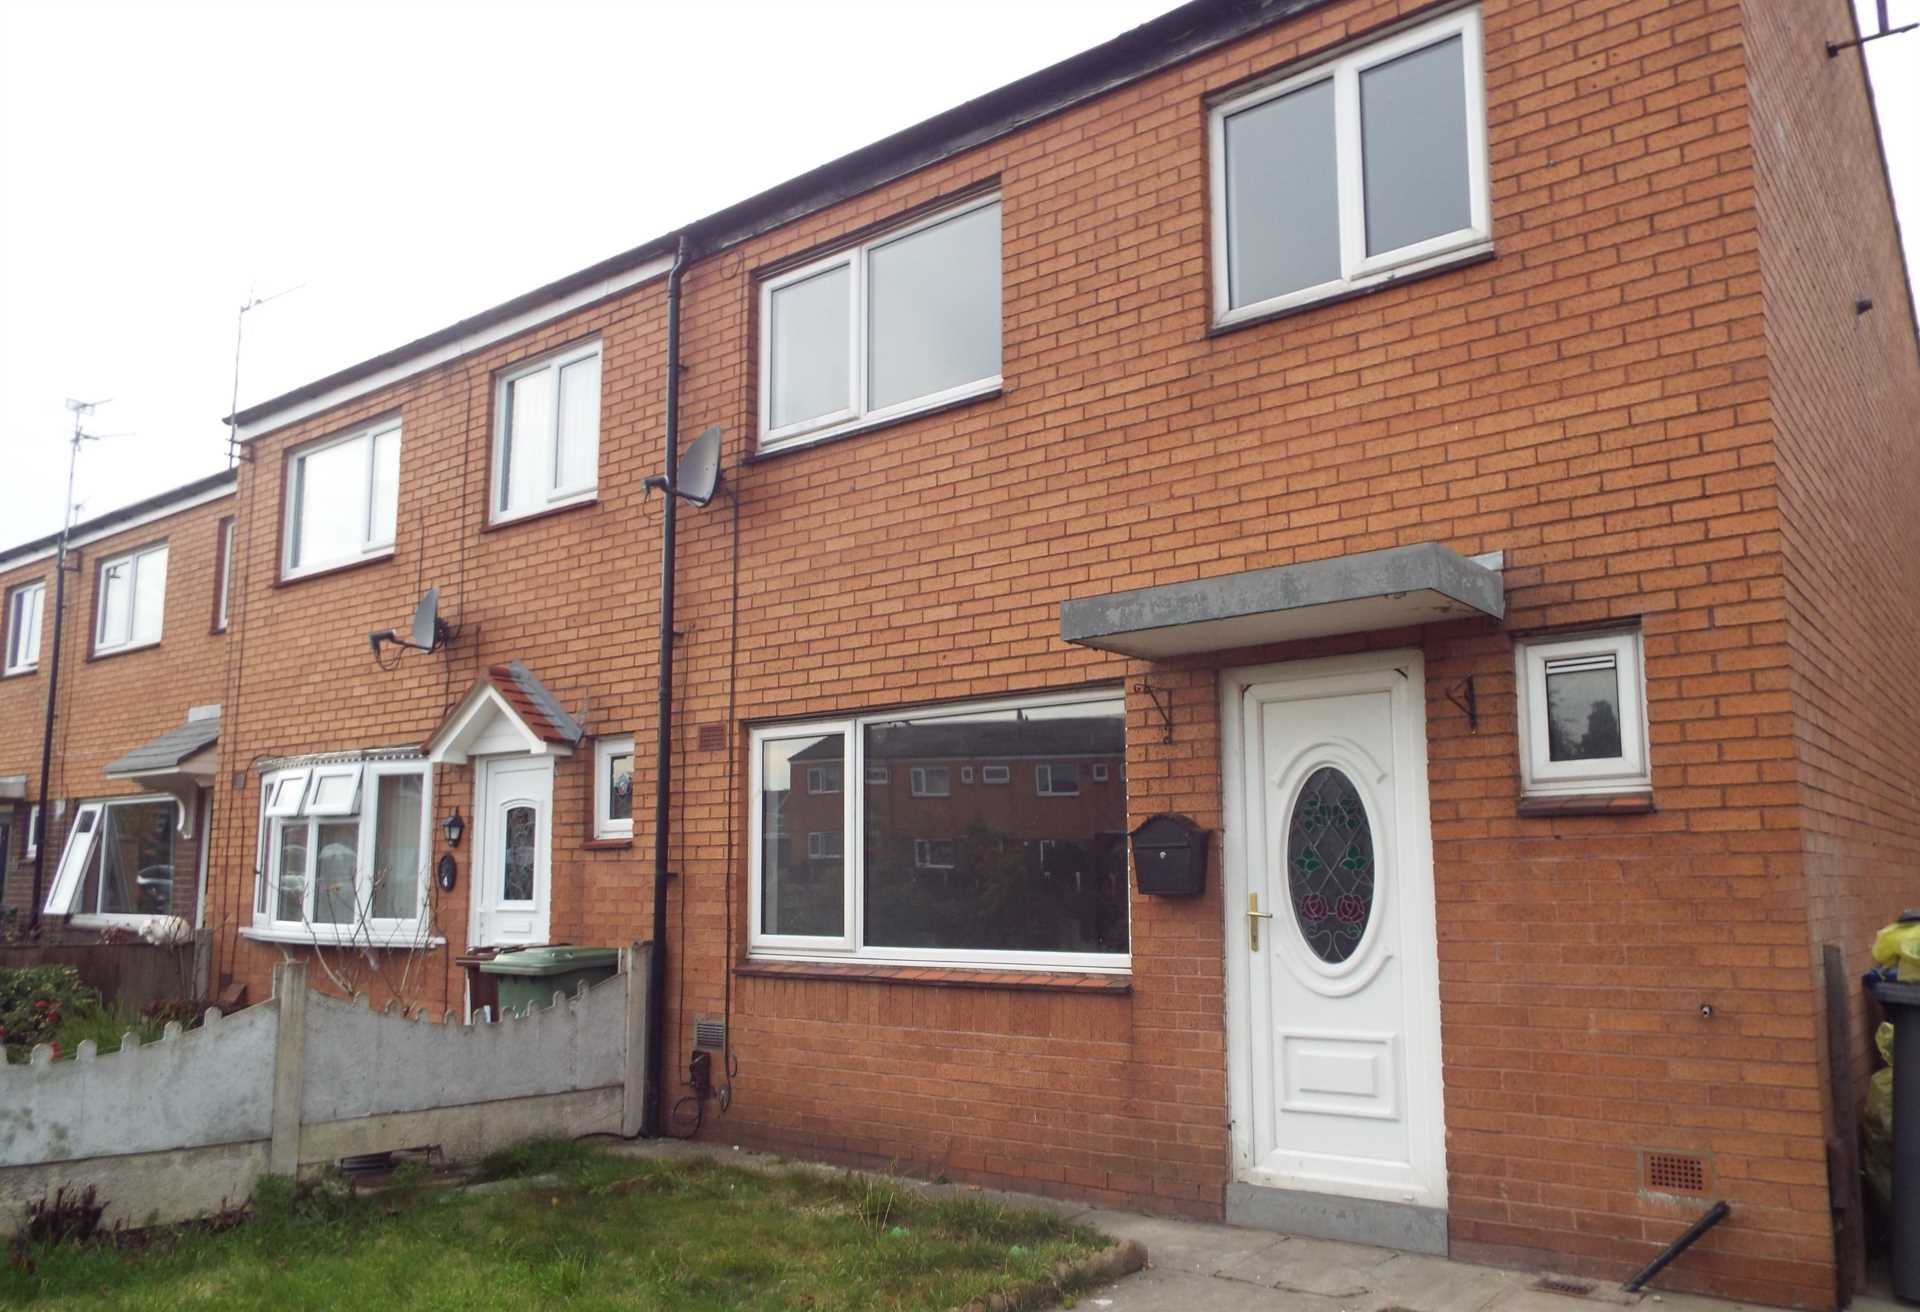 3 bed Town House for rent in Wigan. From Sure Move Lettings